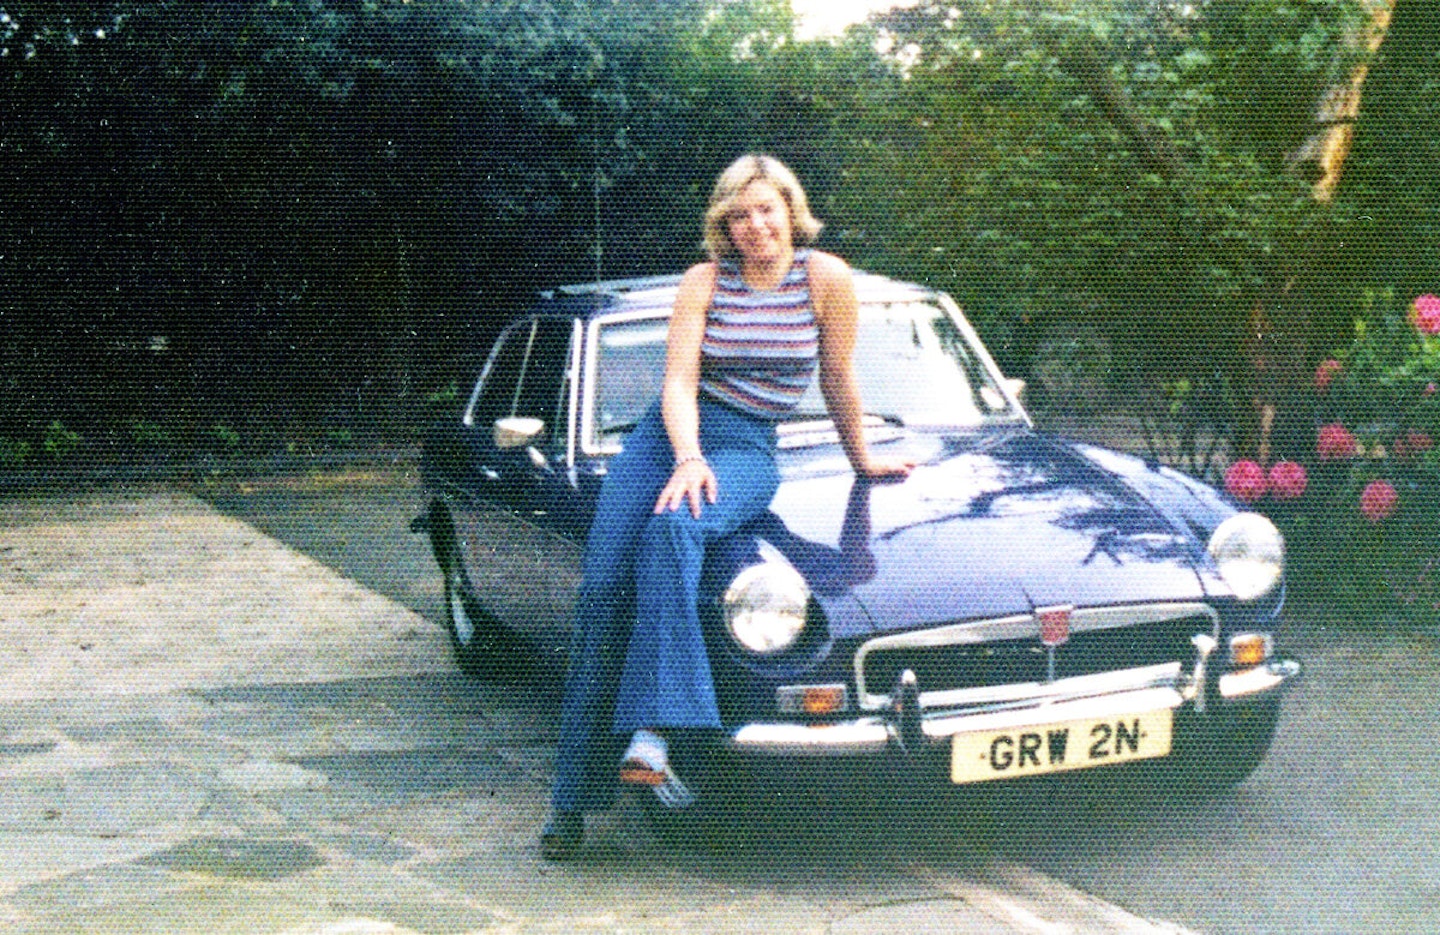 Anne Peace was 25 years old when she took delivery of her MG in 1974